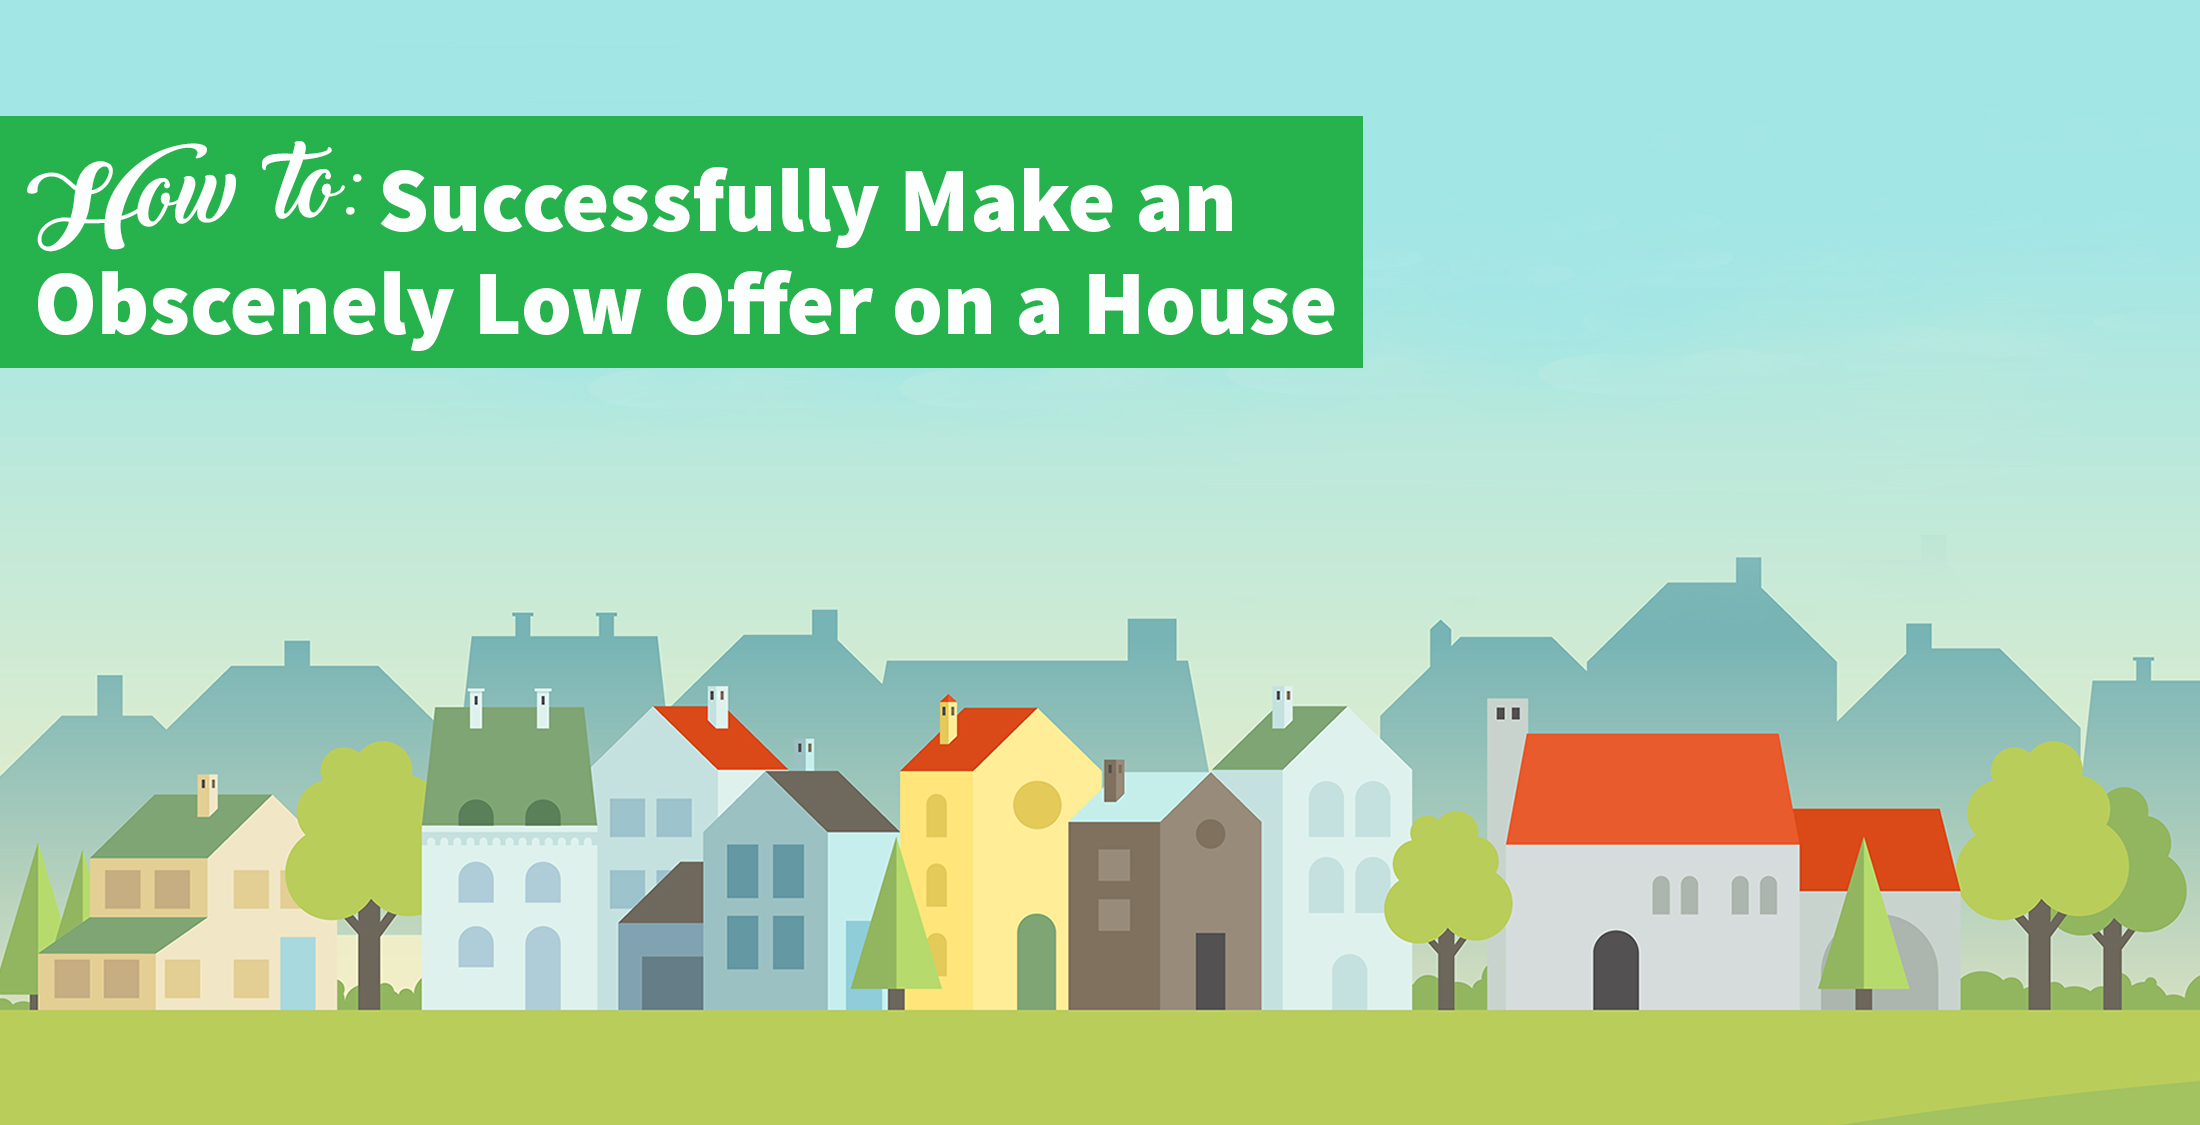 how much less should i offer on a house